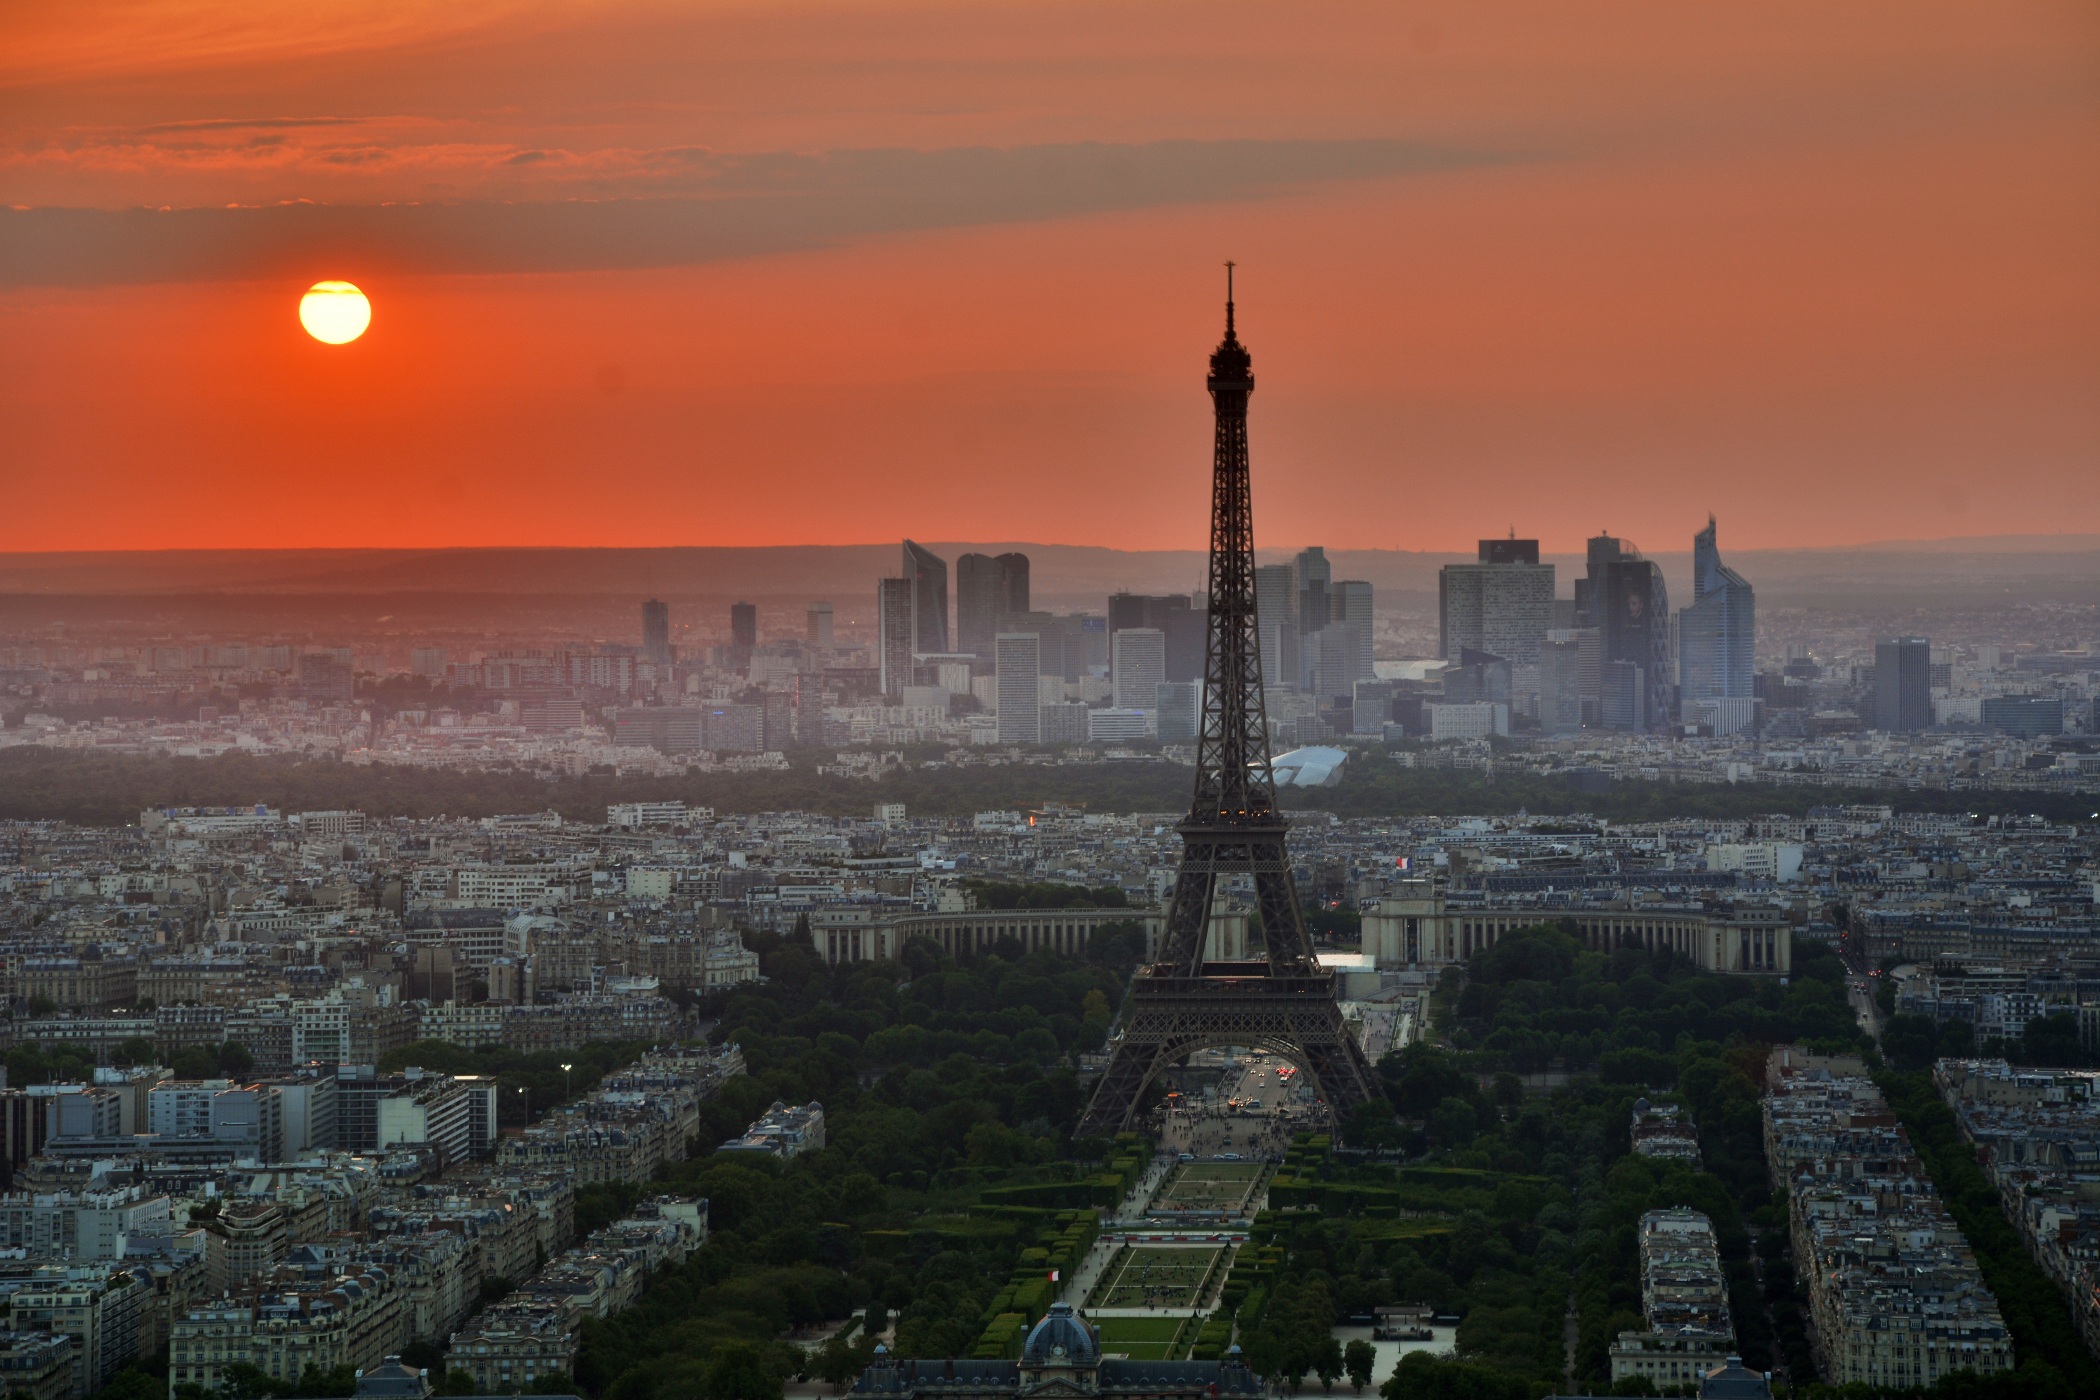 A sunset view in Paris